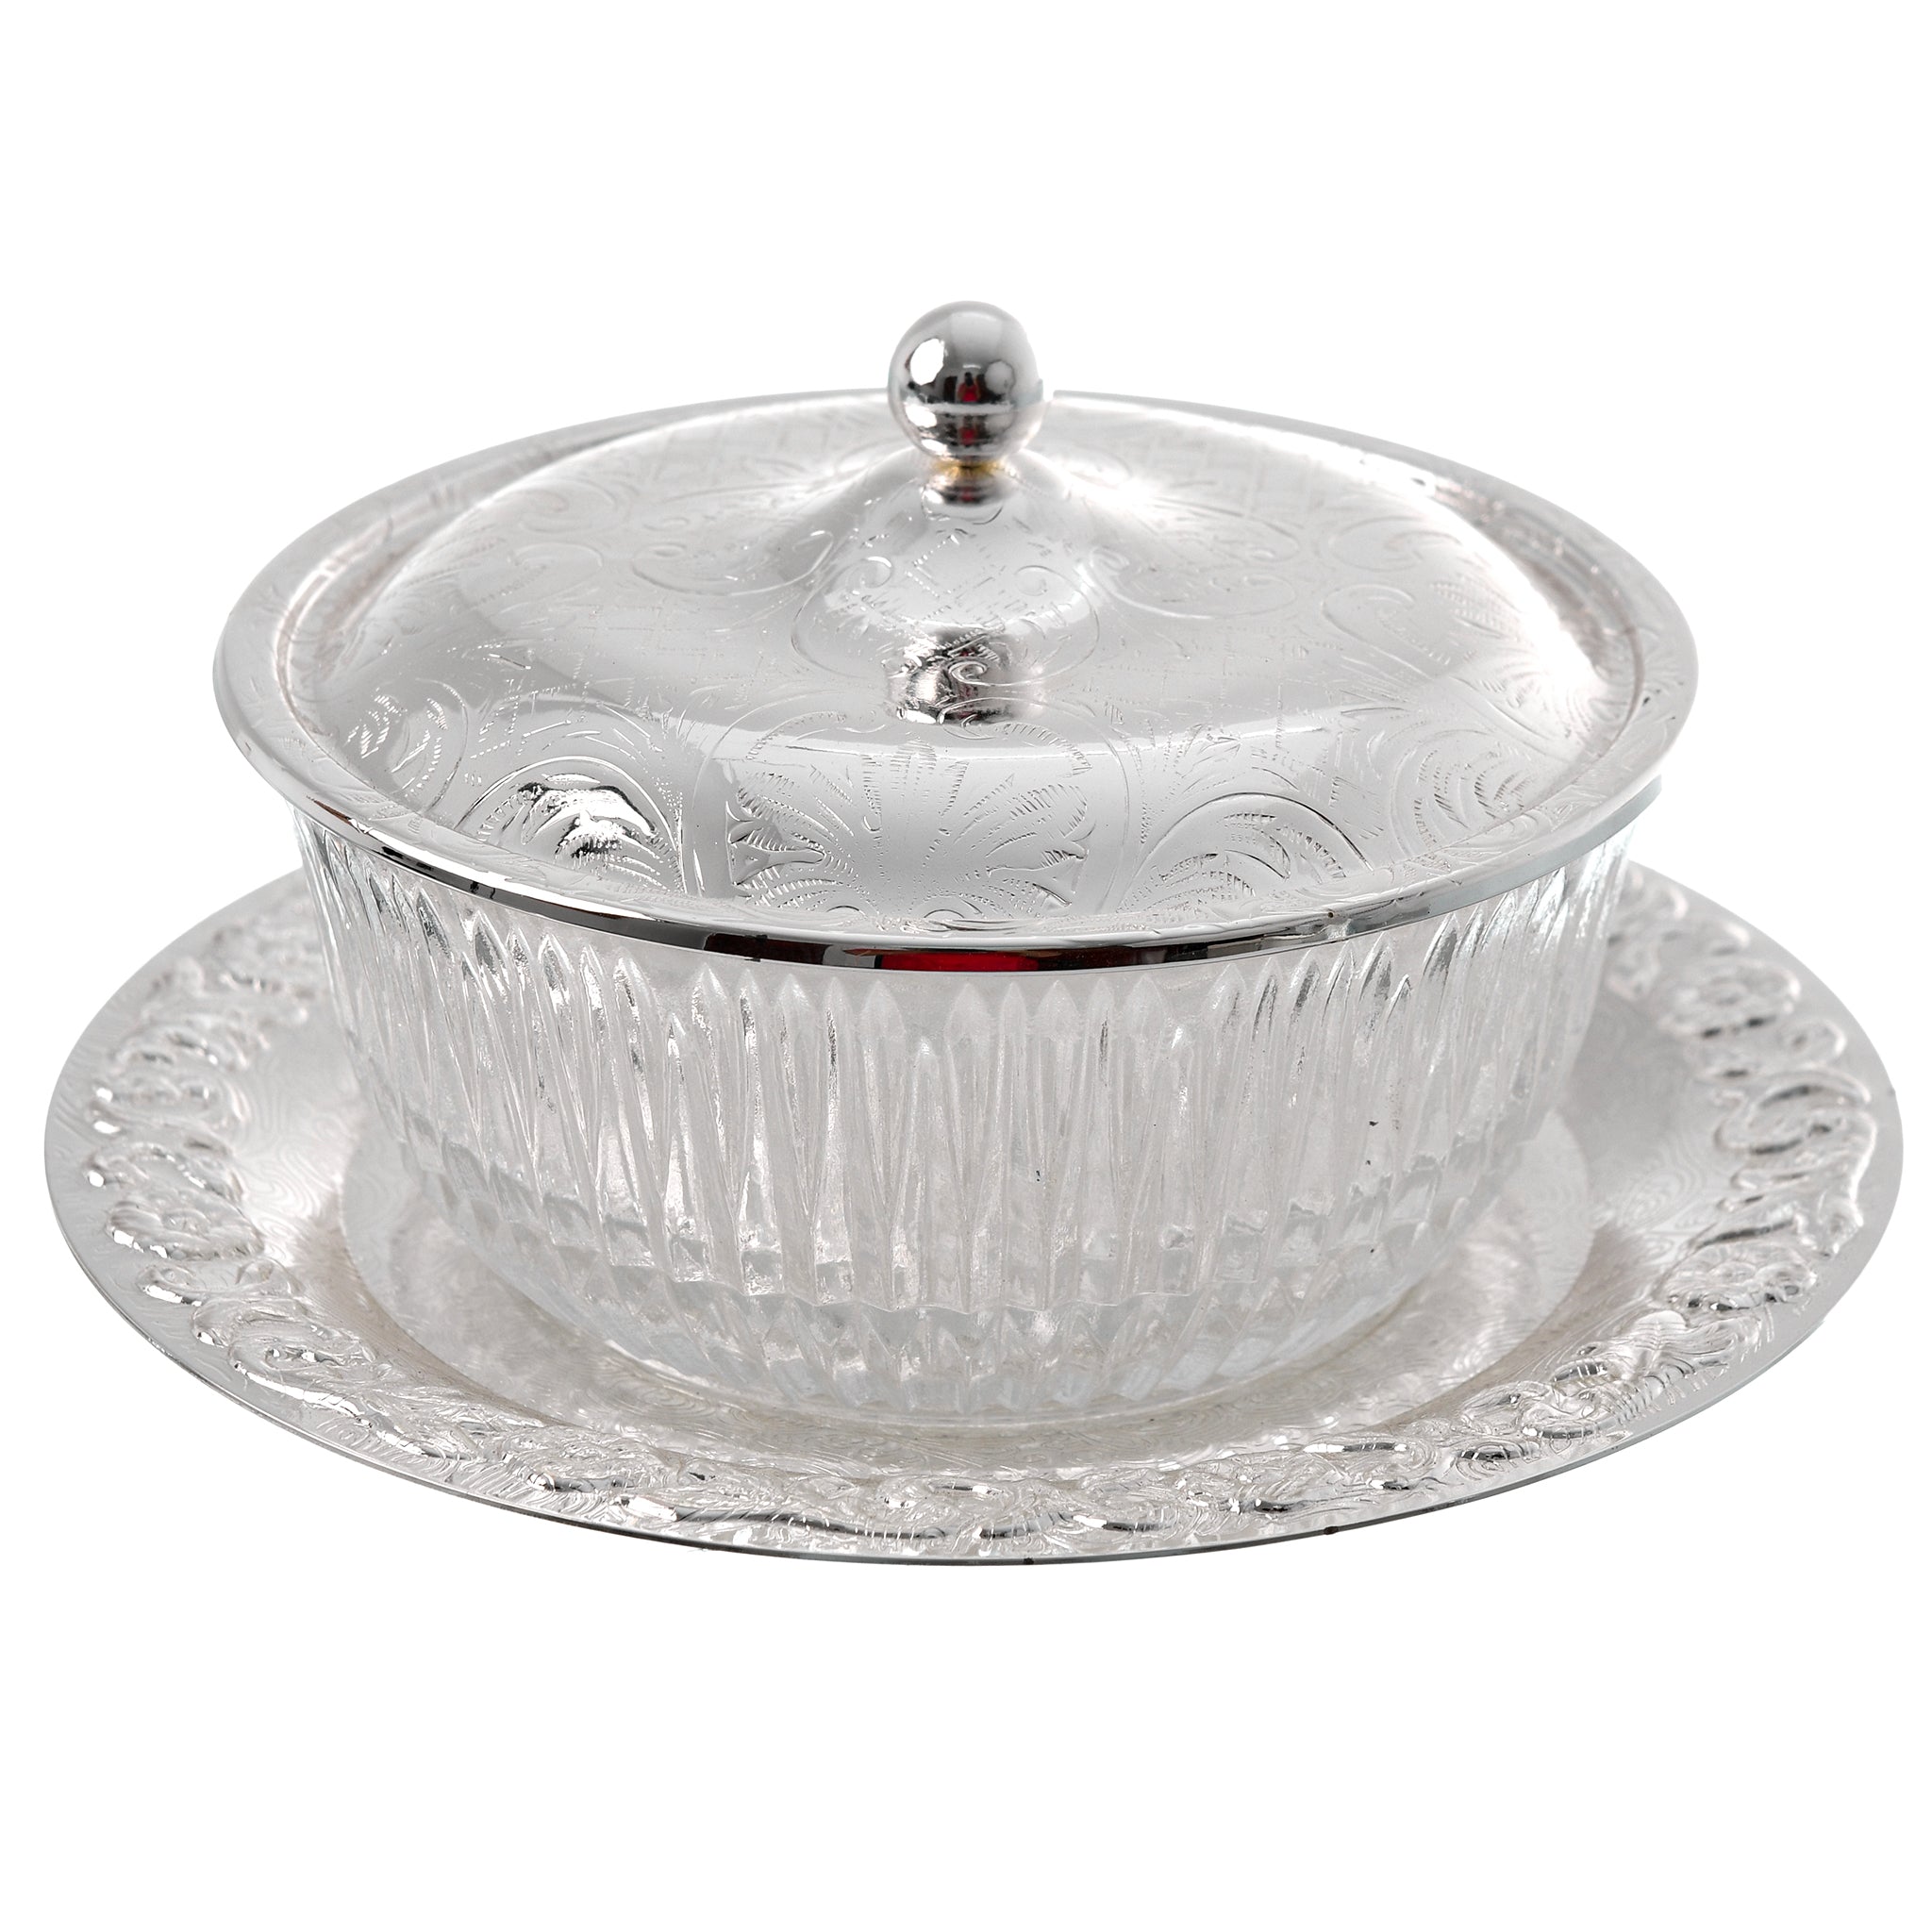 Queen Anne - Sugar Bowl With Cover & Tray - Silver Plated Metal - 26000443